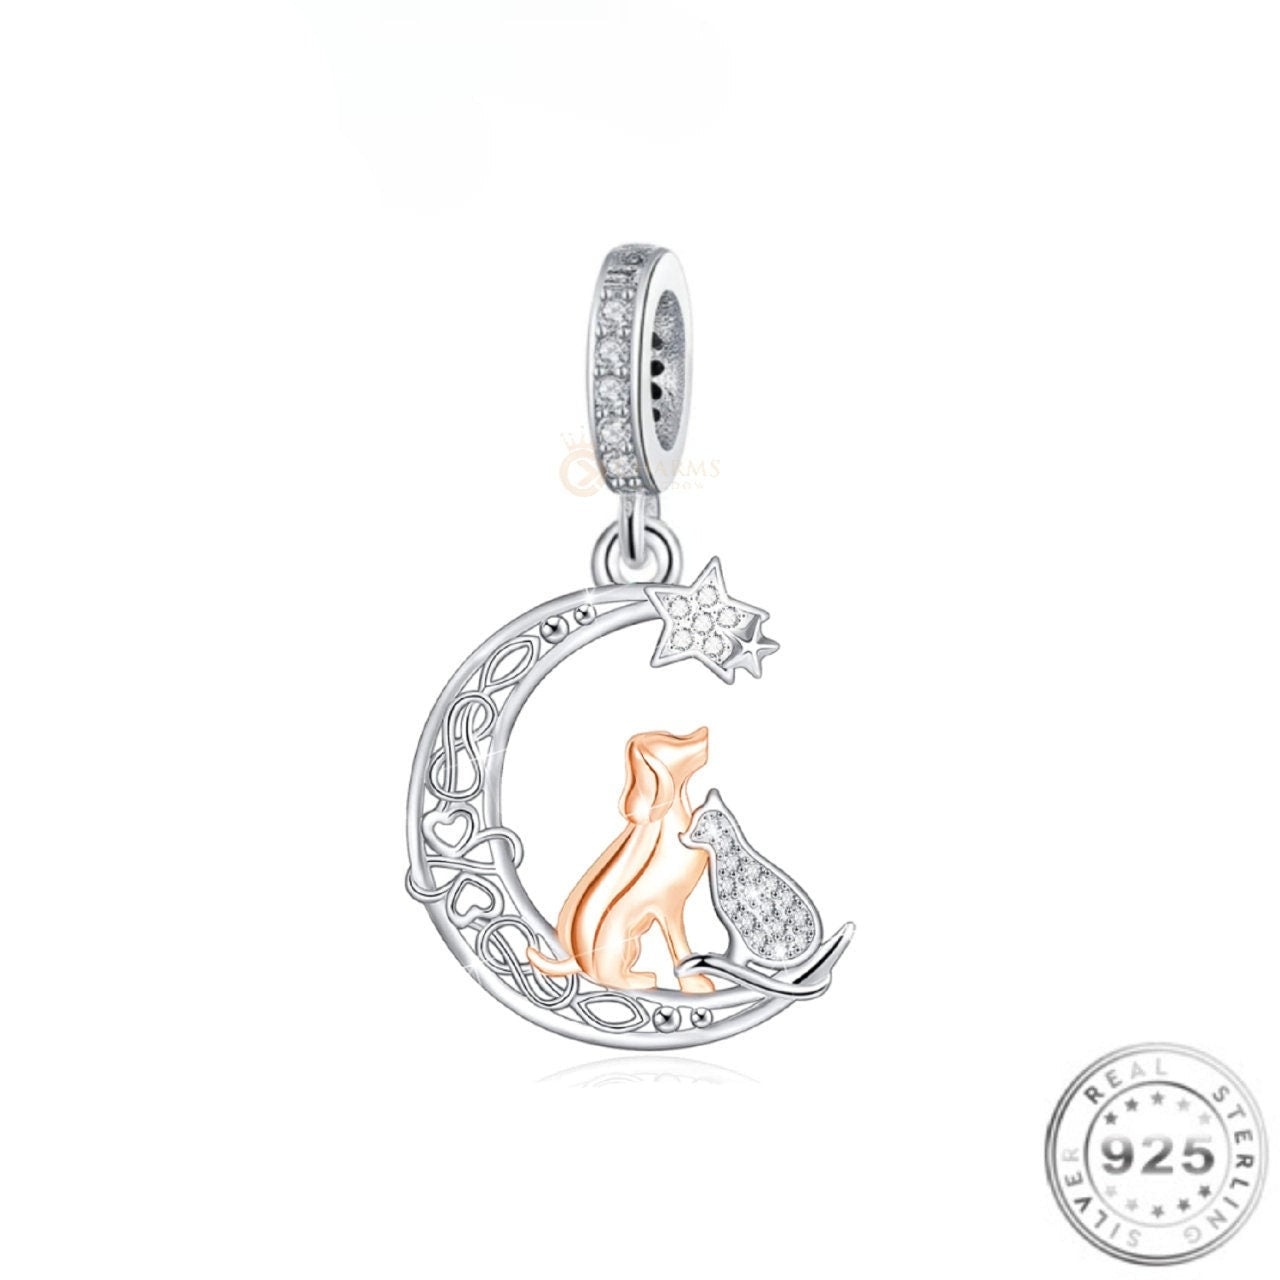 Dog & Cat in the Moon Charm 925 Sterling Silver fits pandora